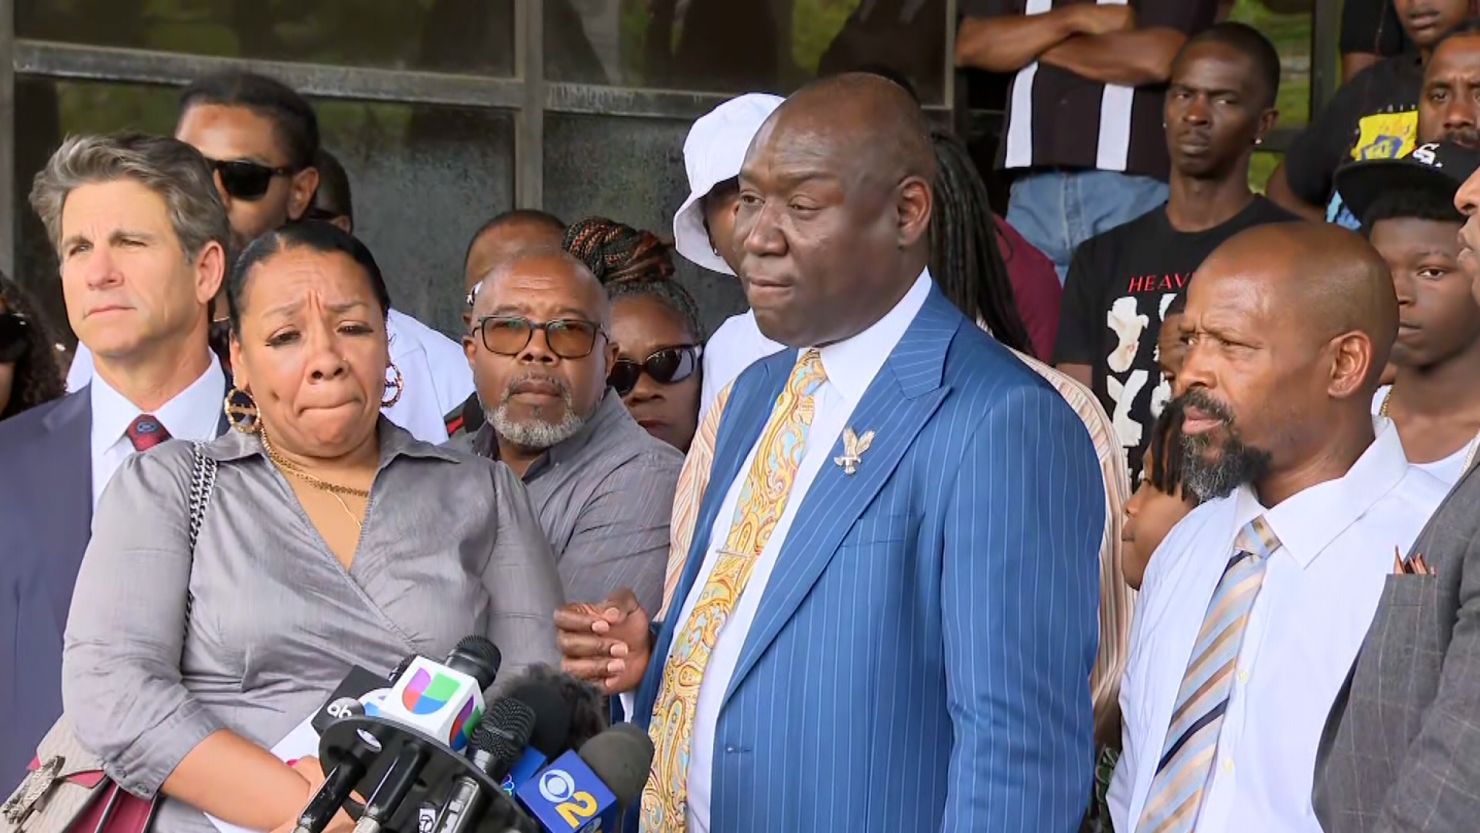 $4 award to family of black man fatally shot by cop is reduced to zero